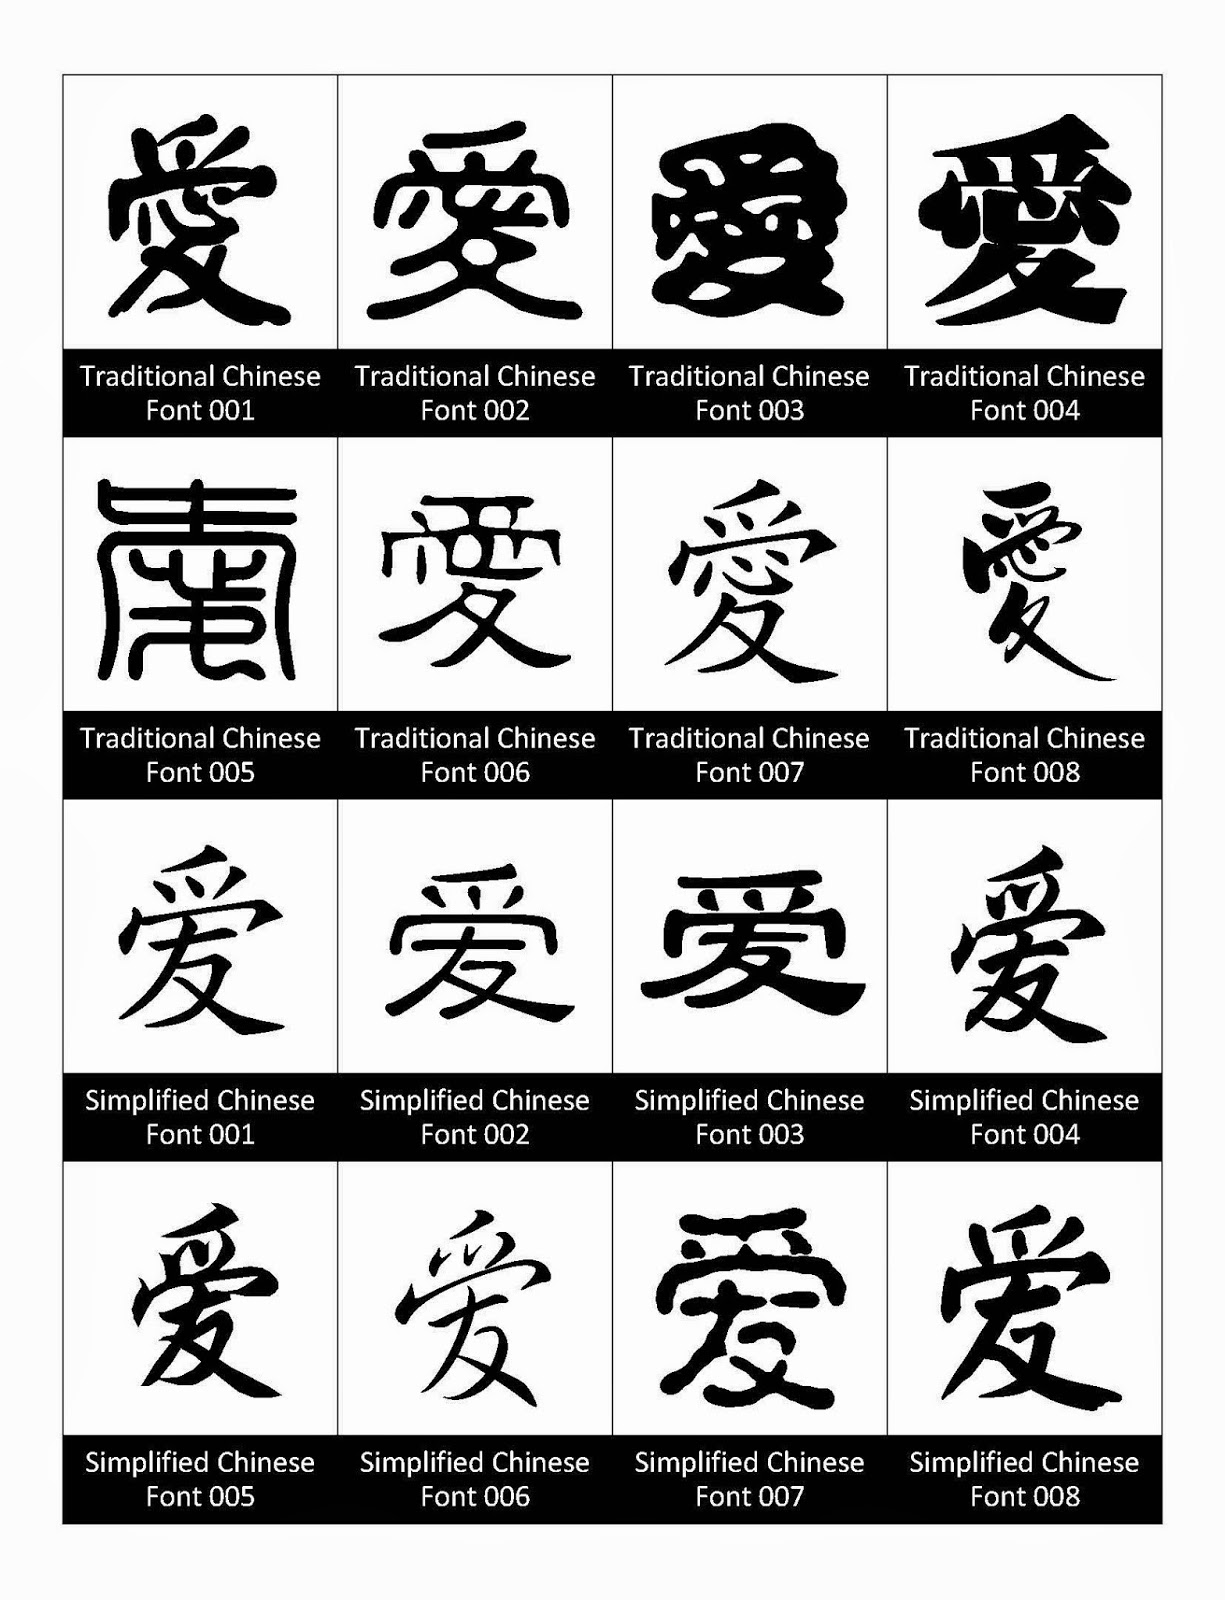 Words.in.Frames: Popular Chinese Fonts